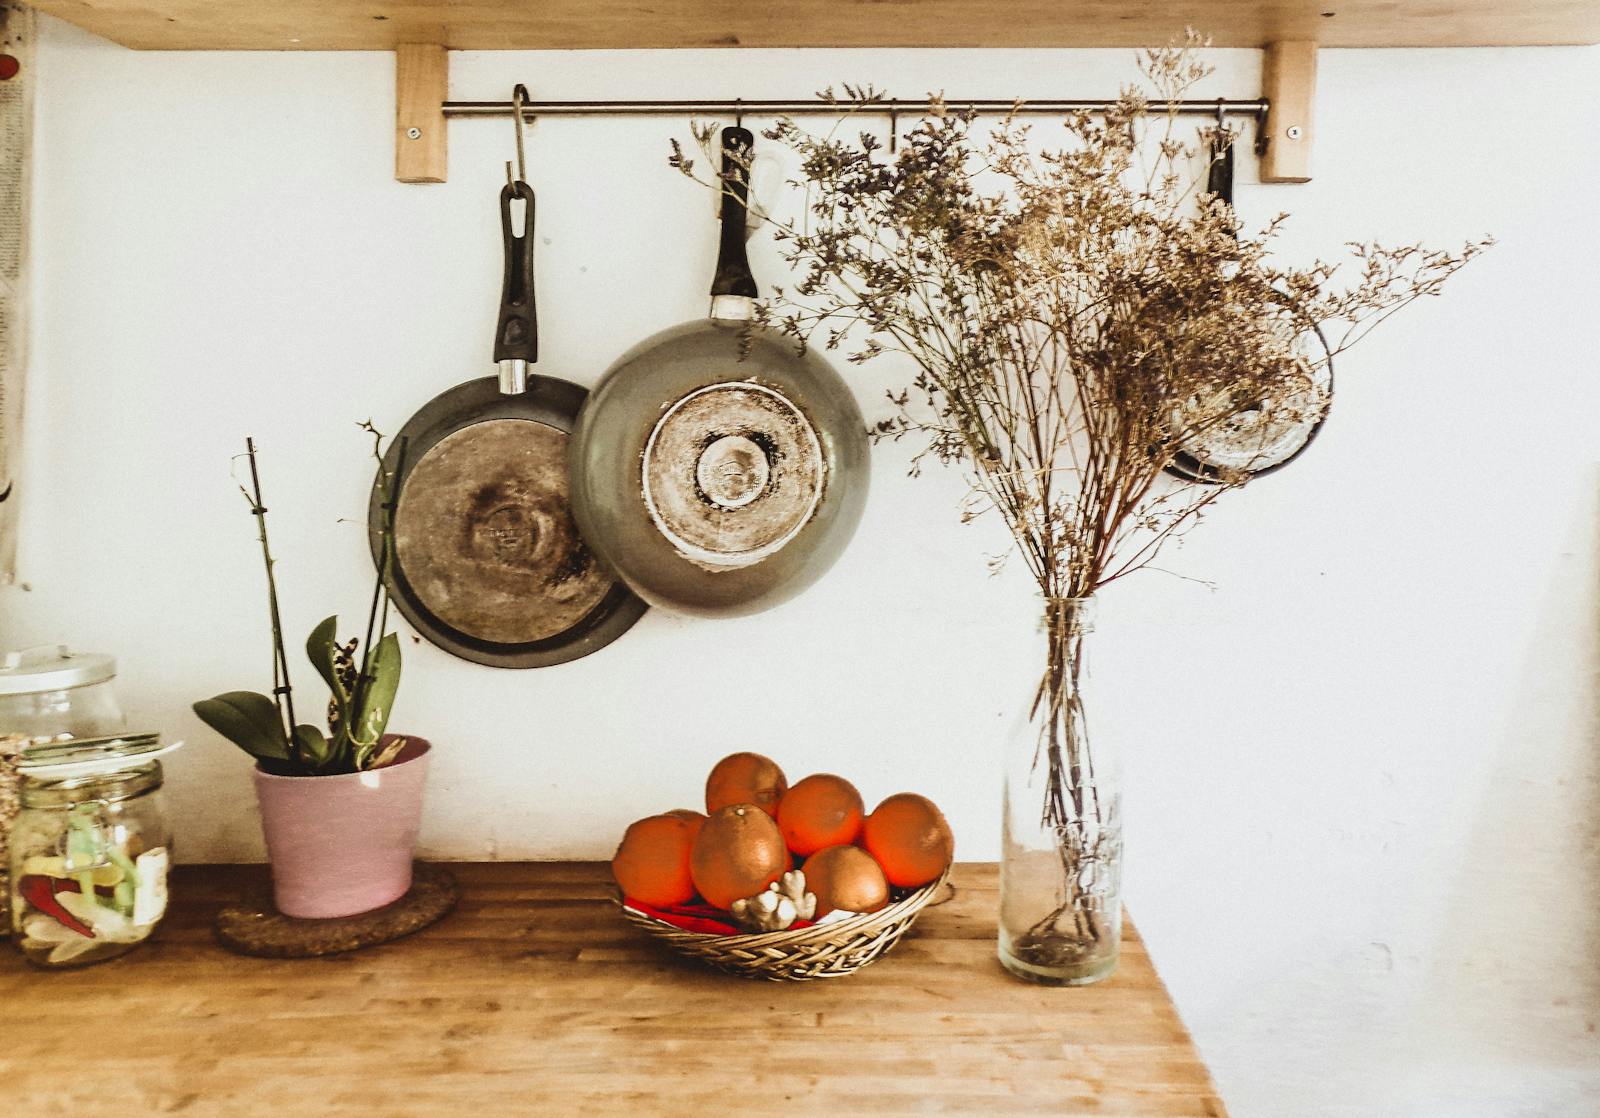 Kitchen Pans Hanging from Wall